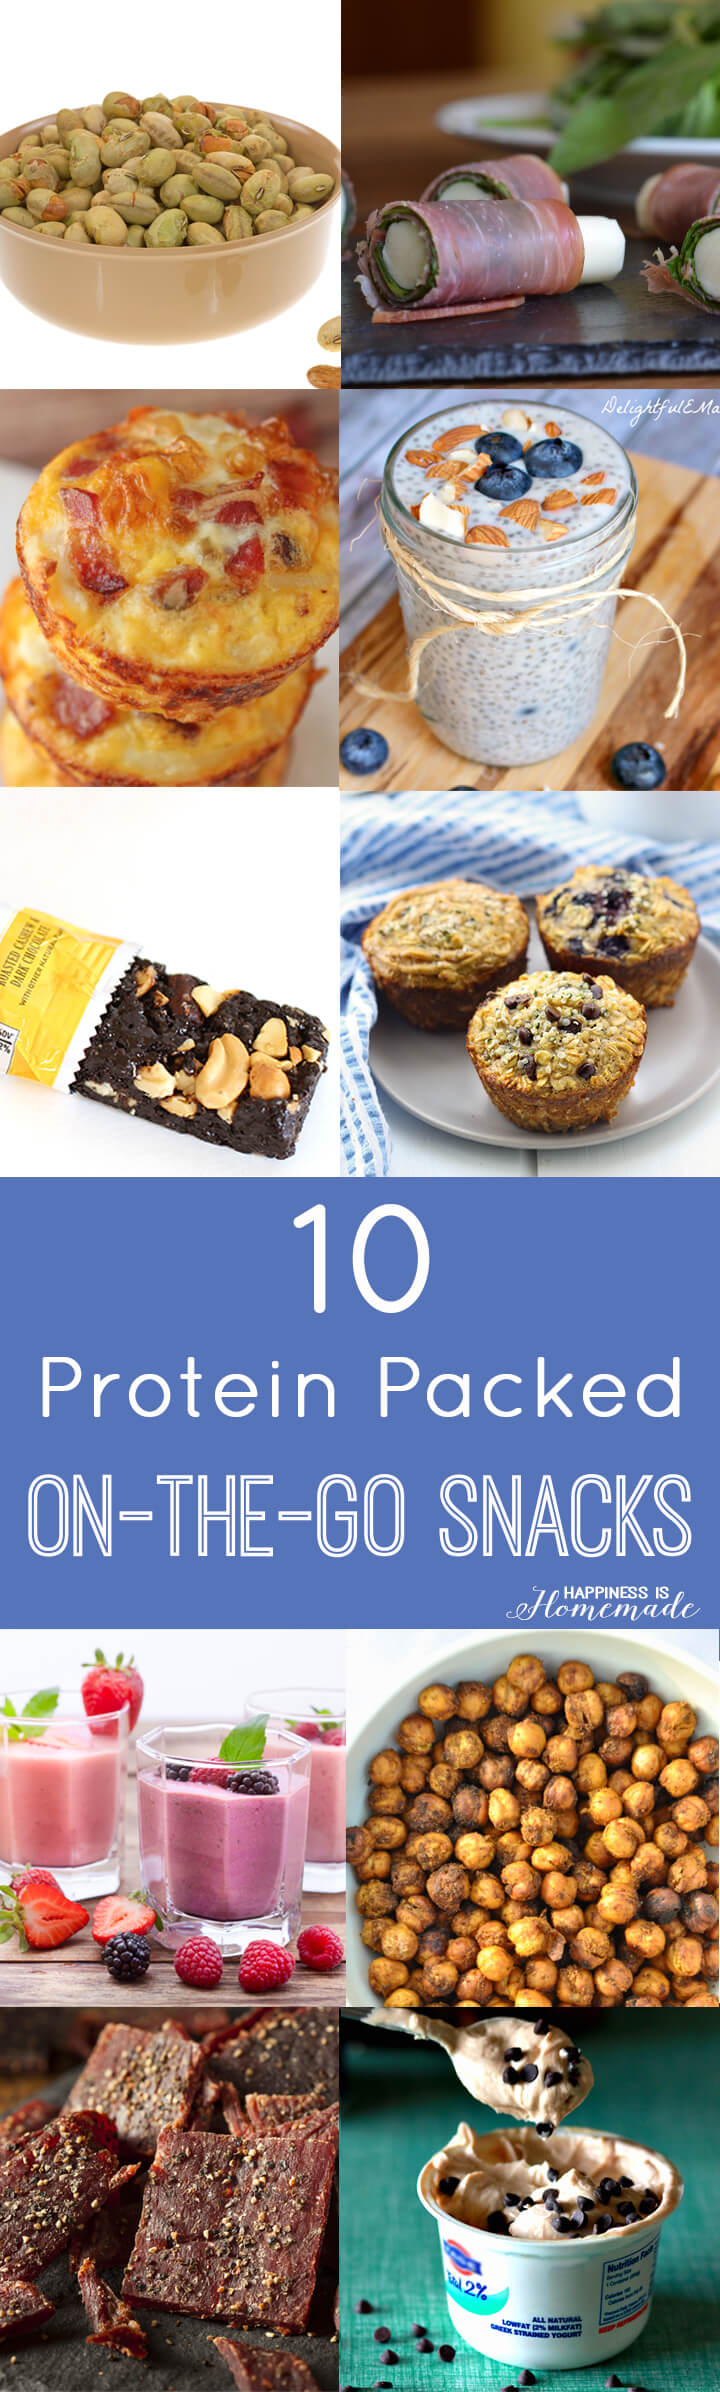 10 Protein Packed On-the-Go Snacks